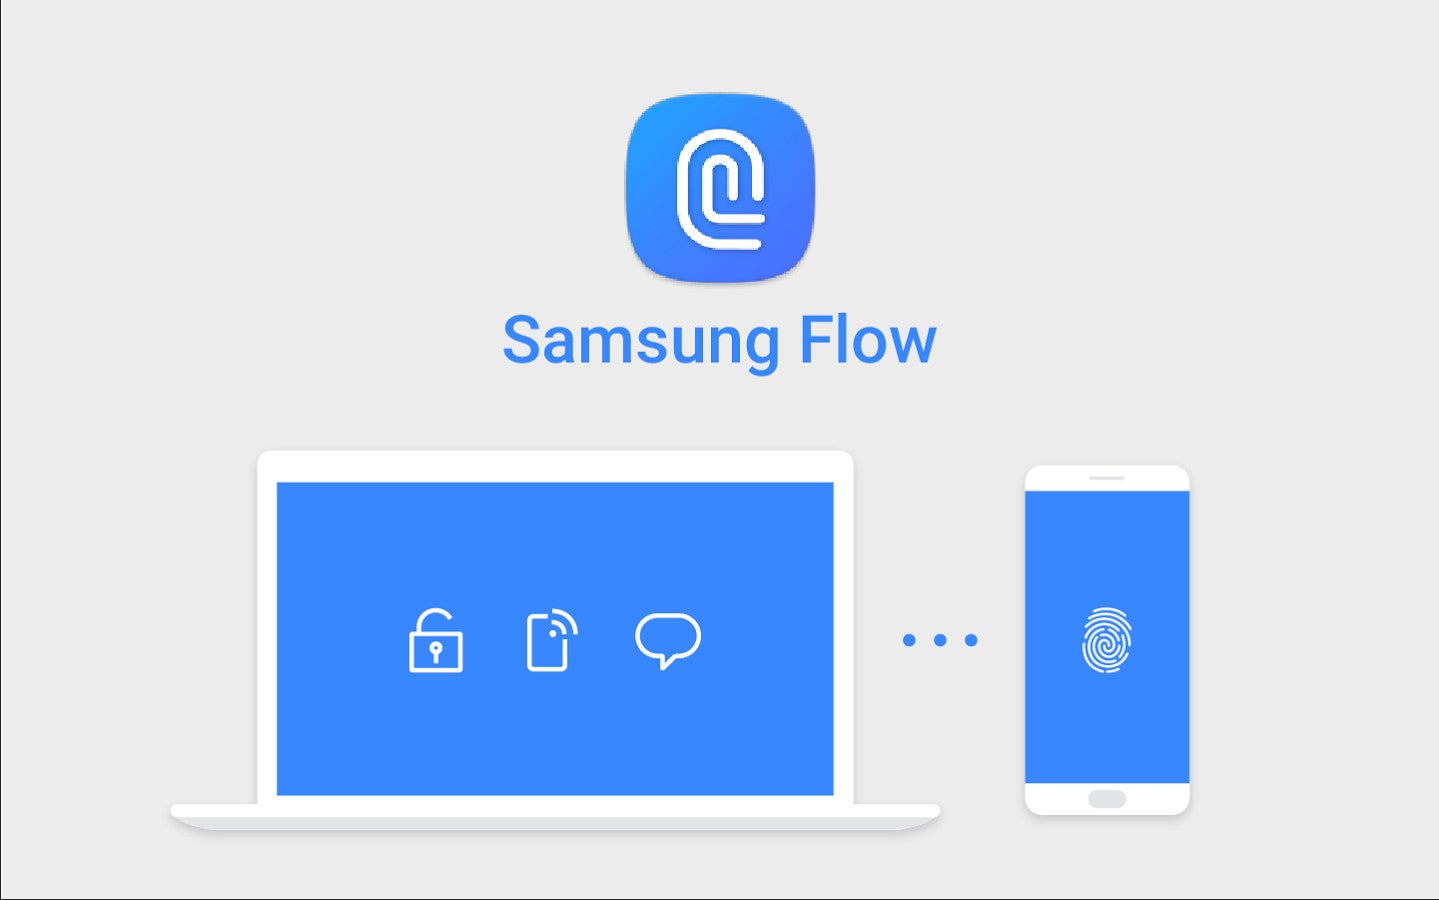 Samsung Flow app to allow Galaxy smartphone users to unlock their Windows 10 PCs with fingerprint